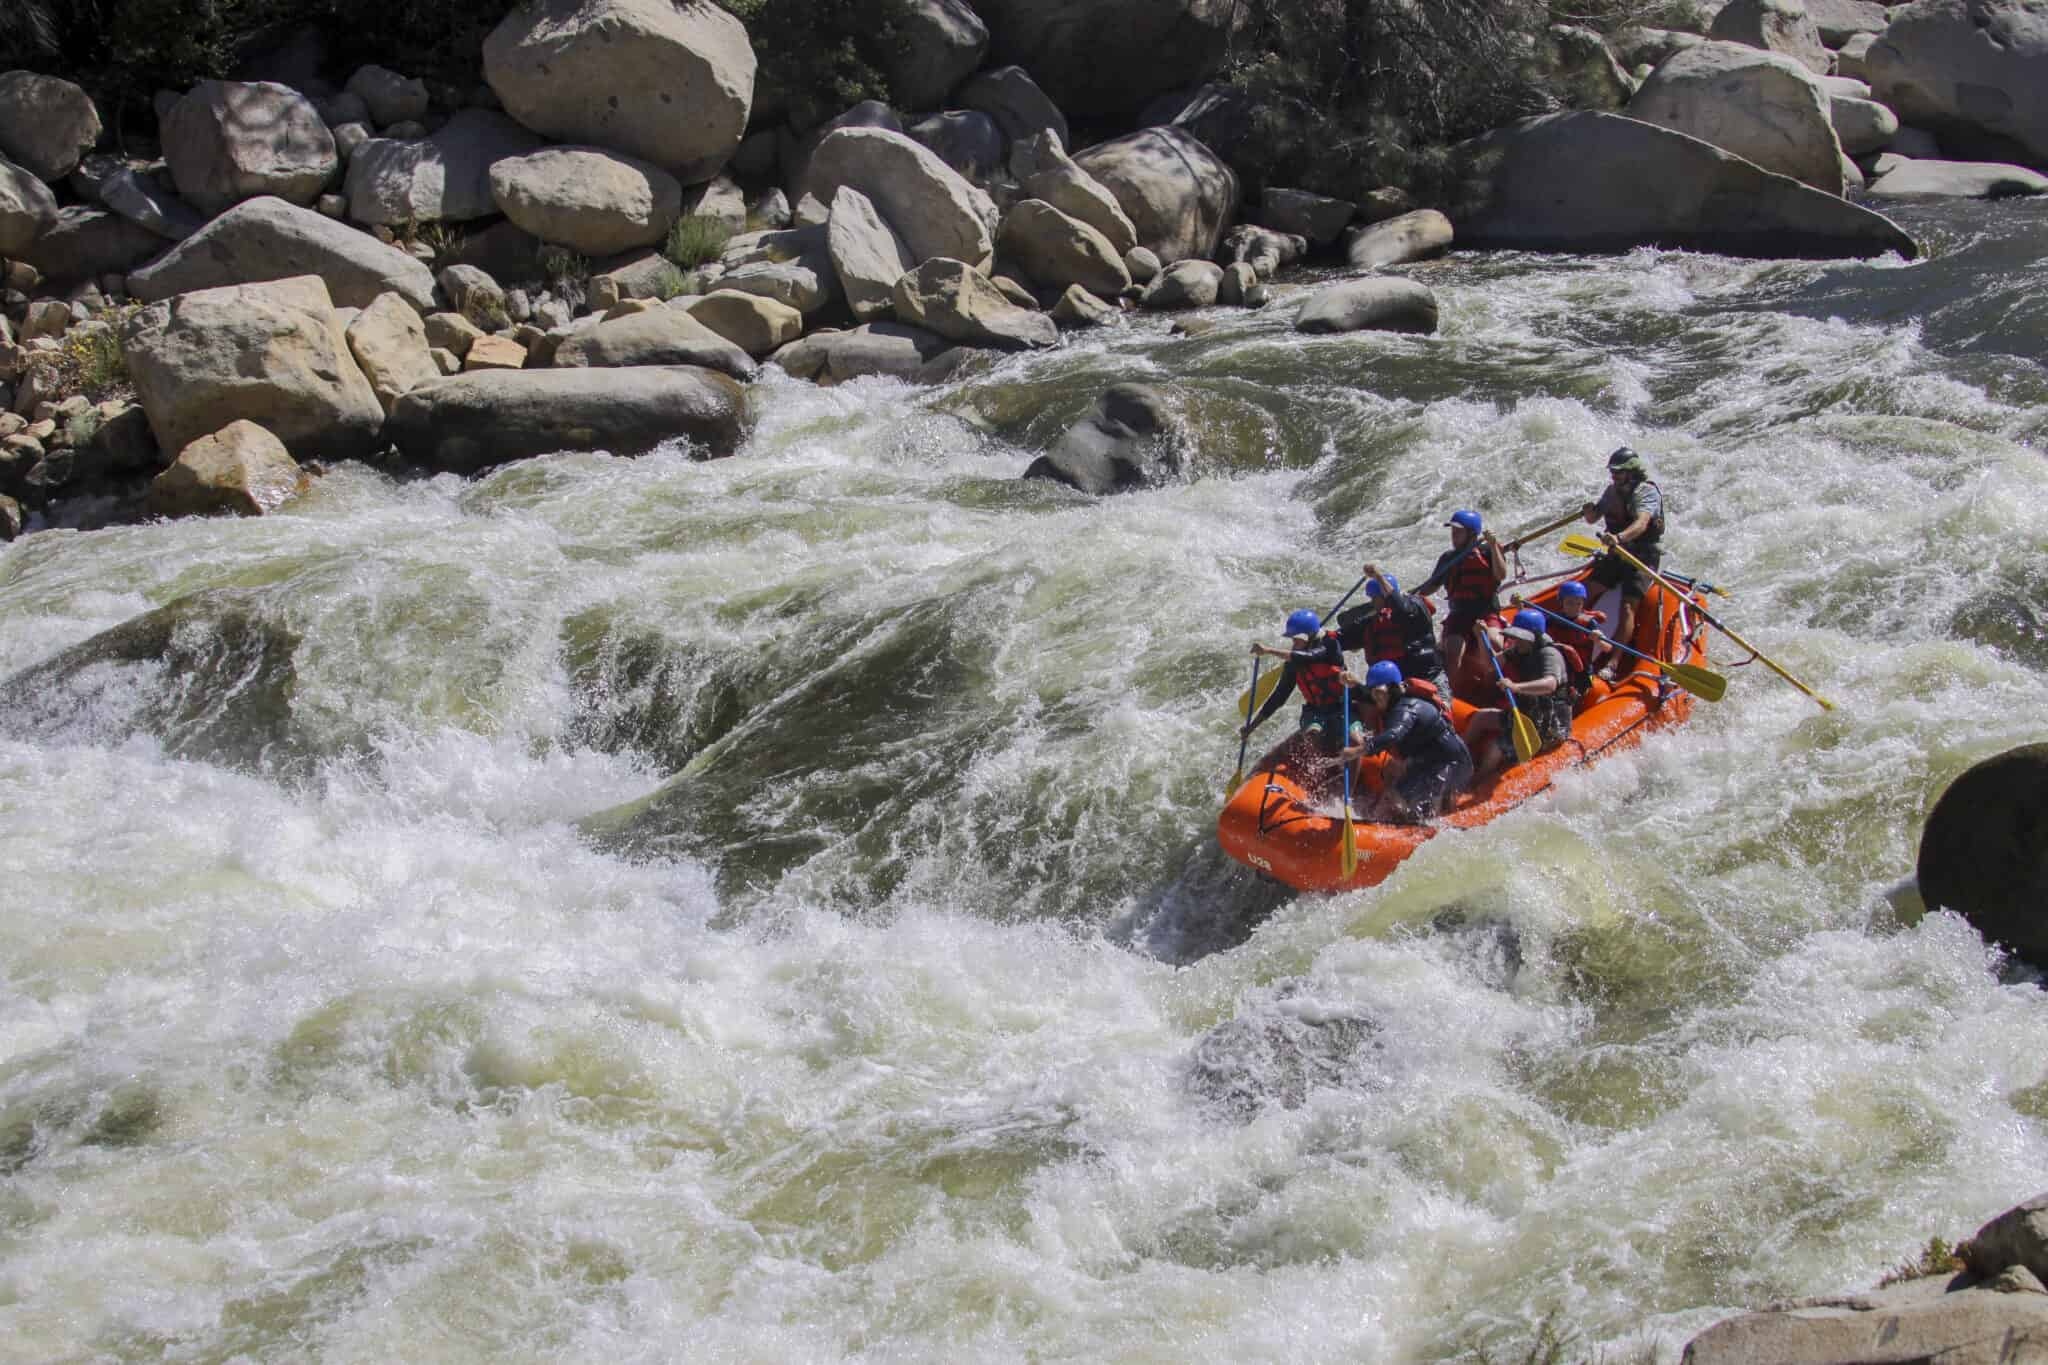 Rafting: Whitewater boating in the Kem River, En expert level river classification. 2050x1370 HD Wallpaper.